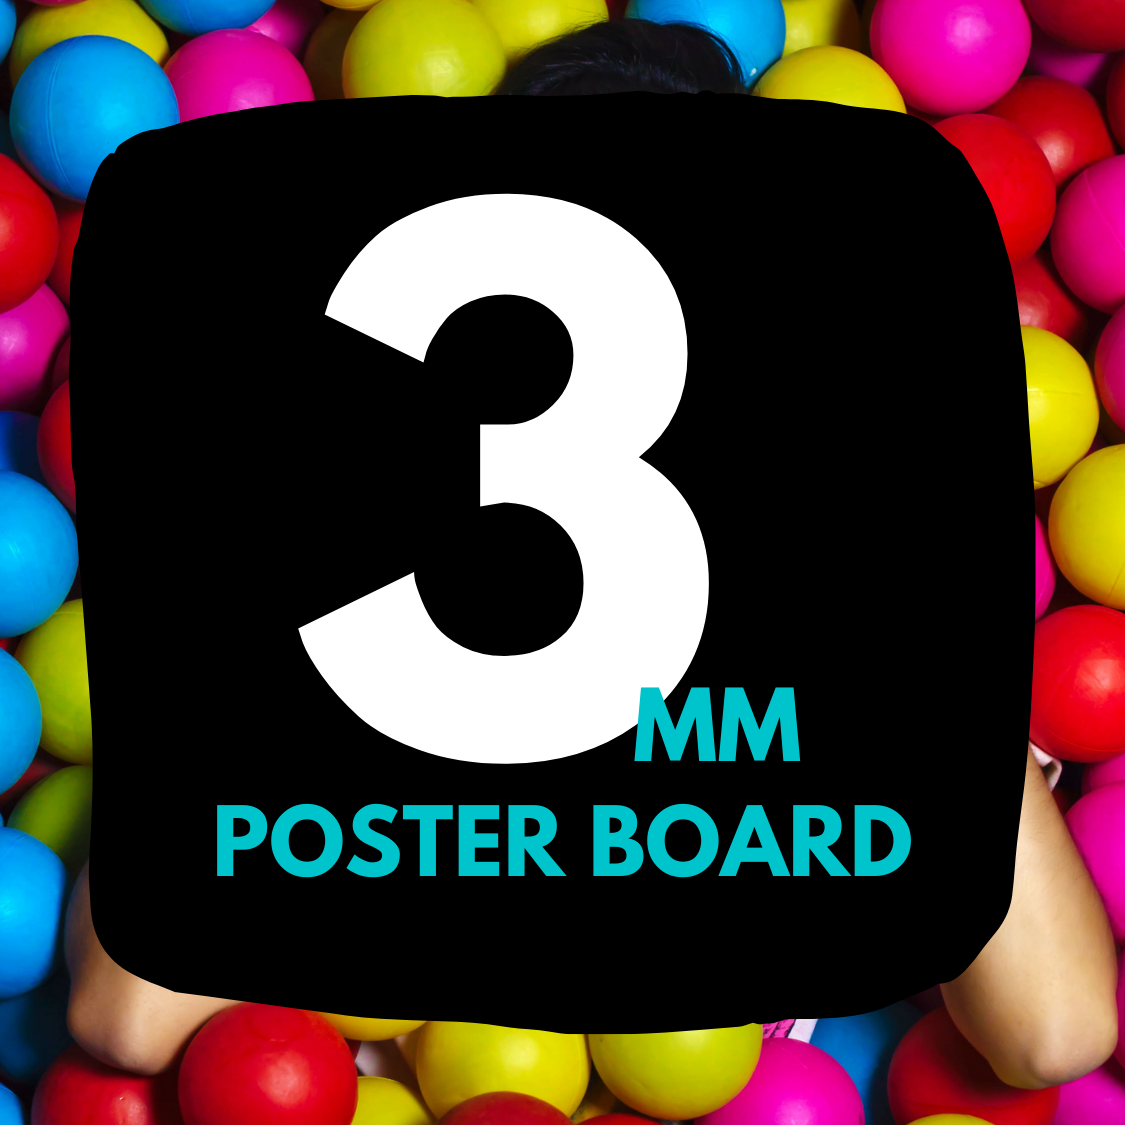 3mm poster boards